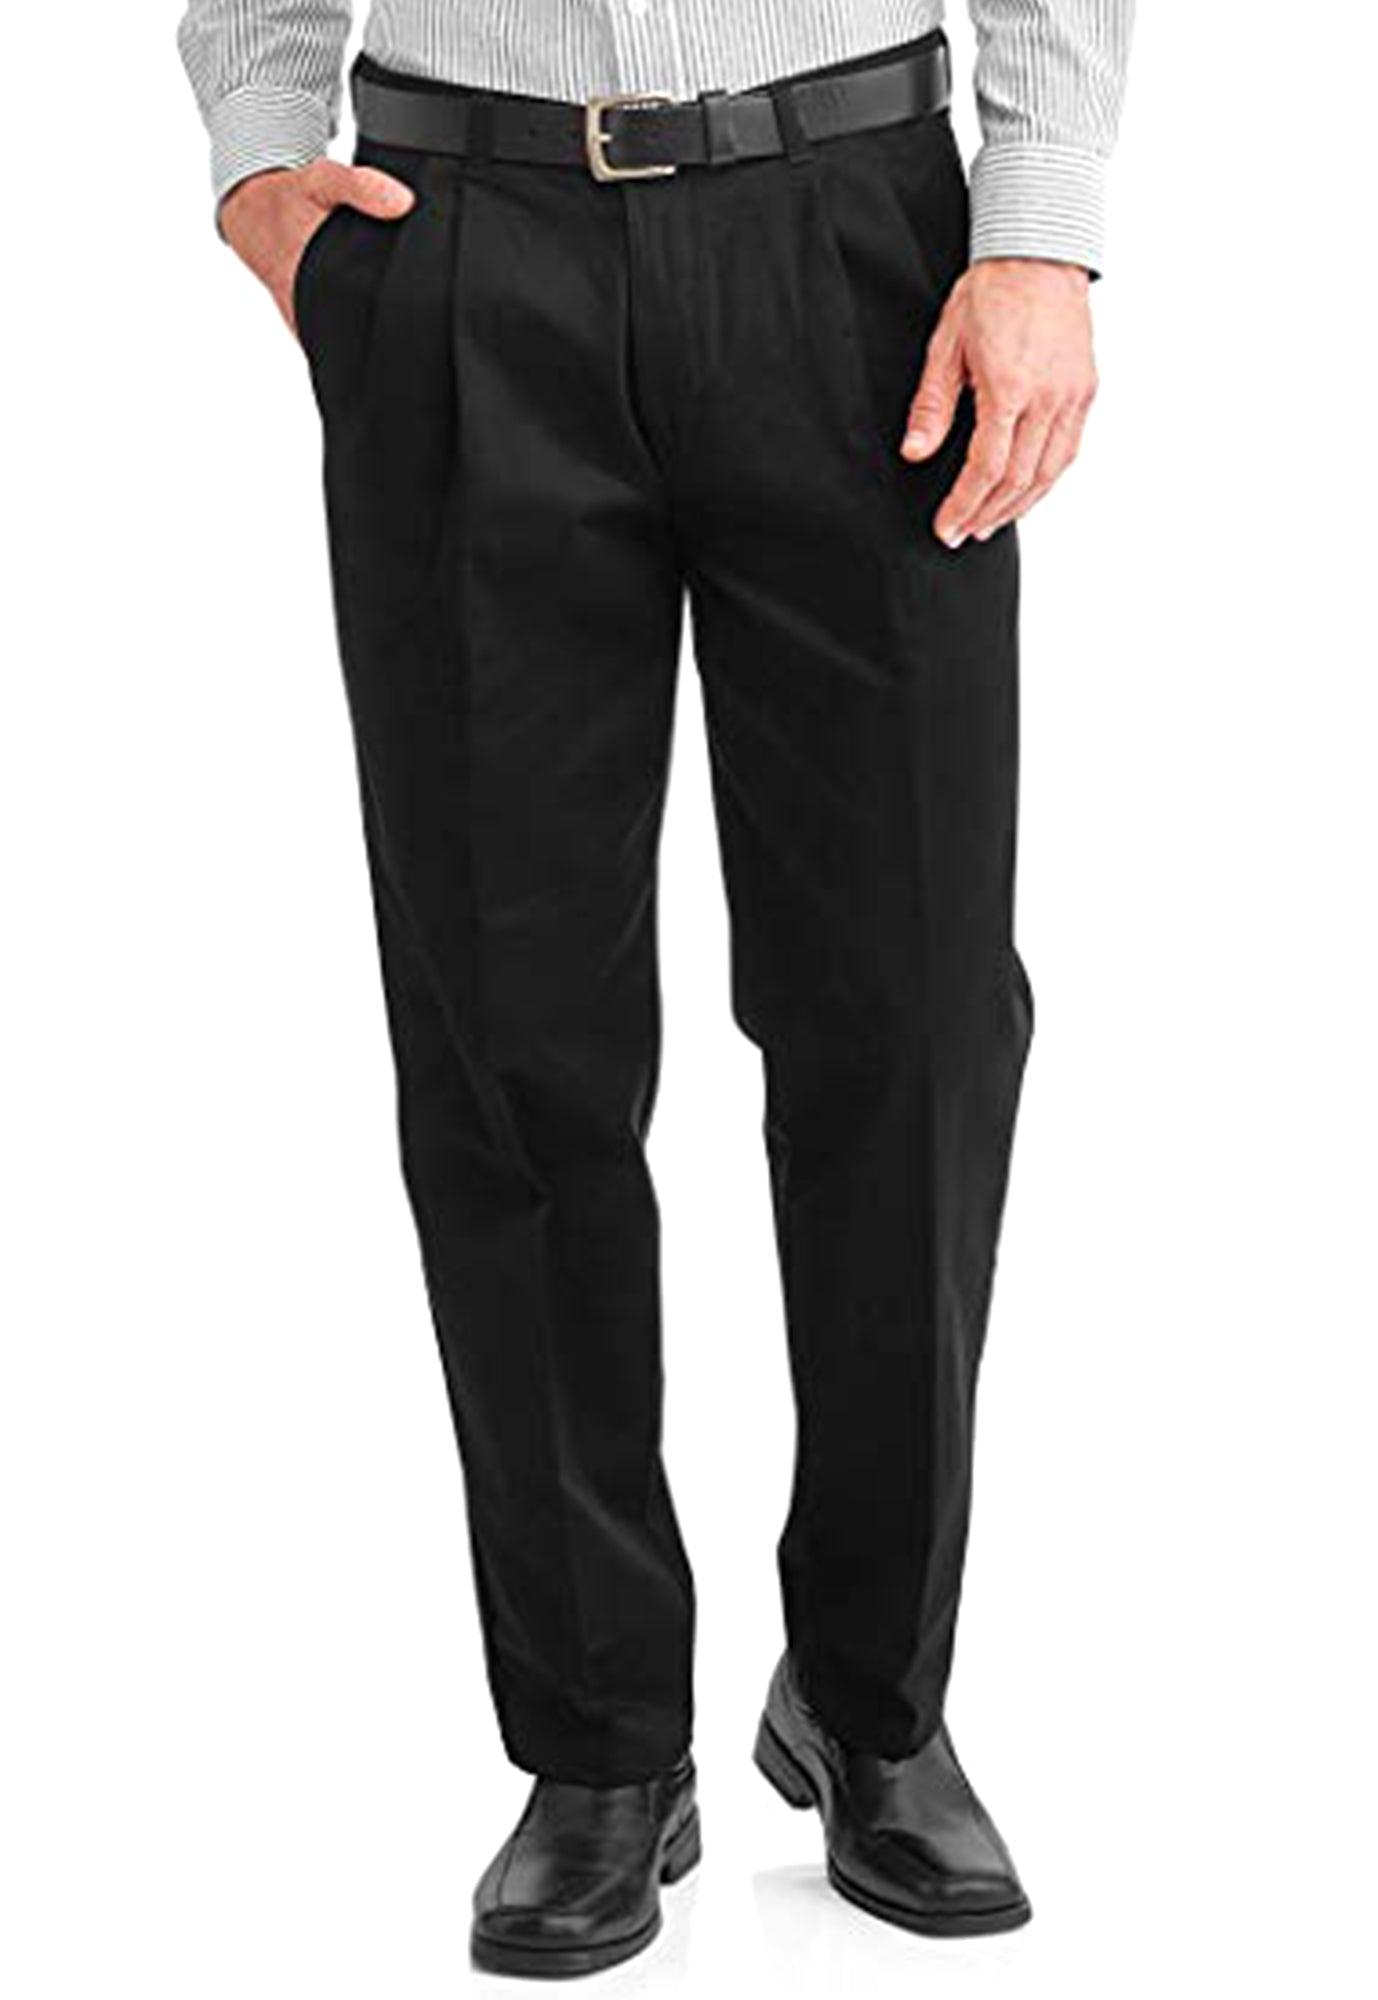 Men's Formal Lycra Pants with Adjustable Waist for a Perfect Fit: Ideal for  Business Meetings, Special